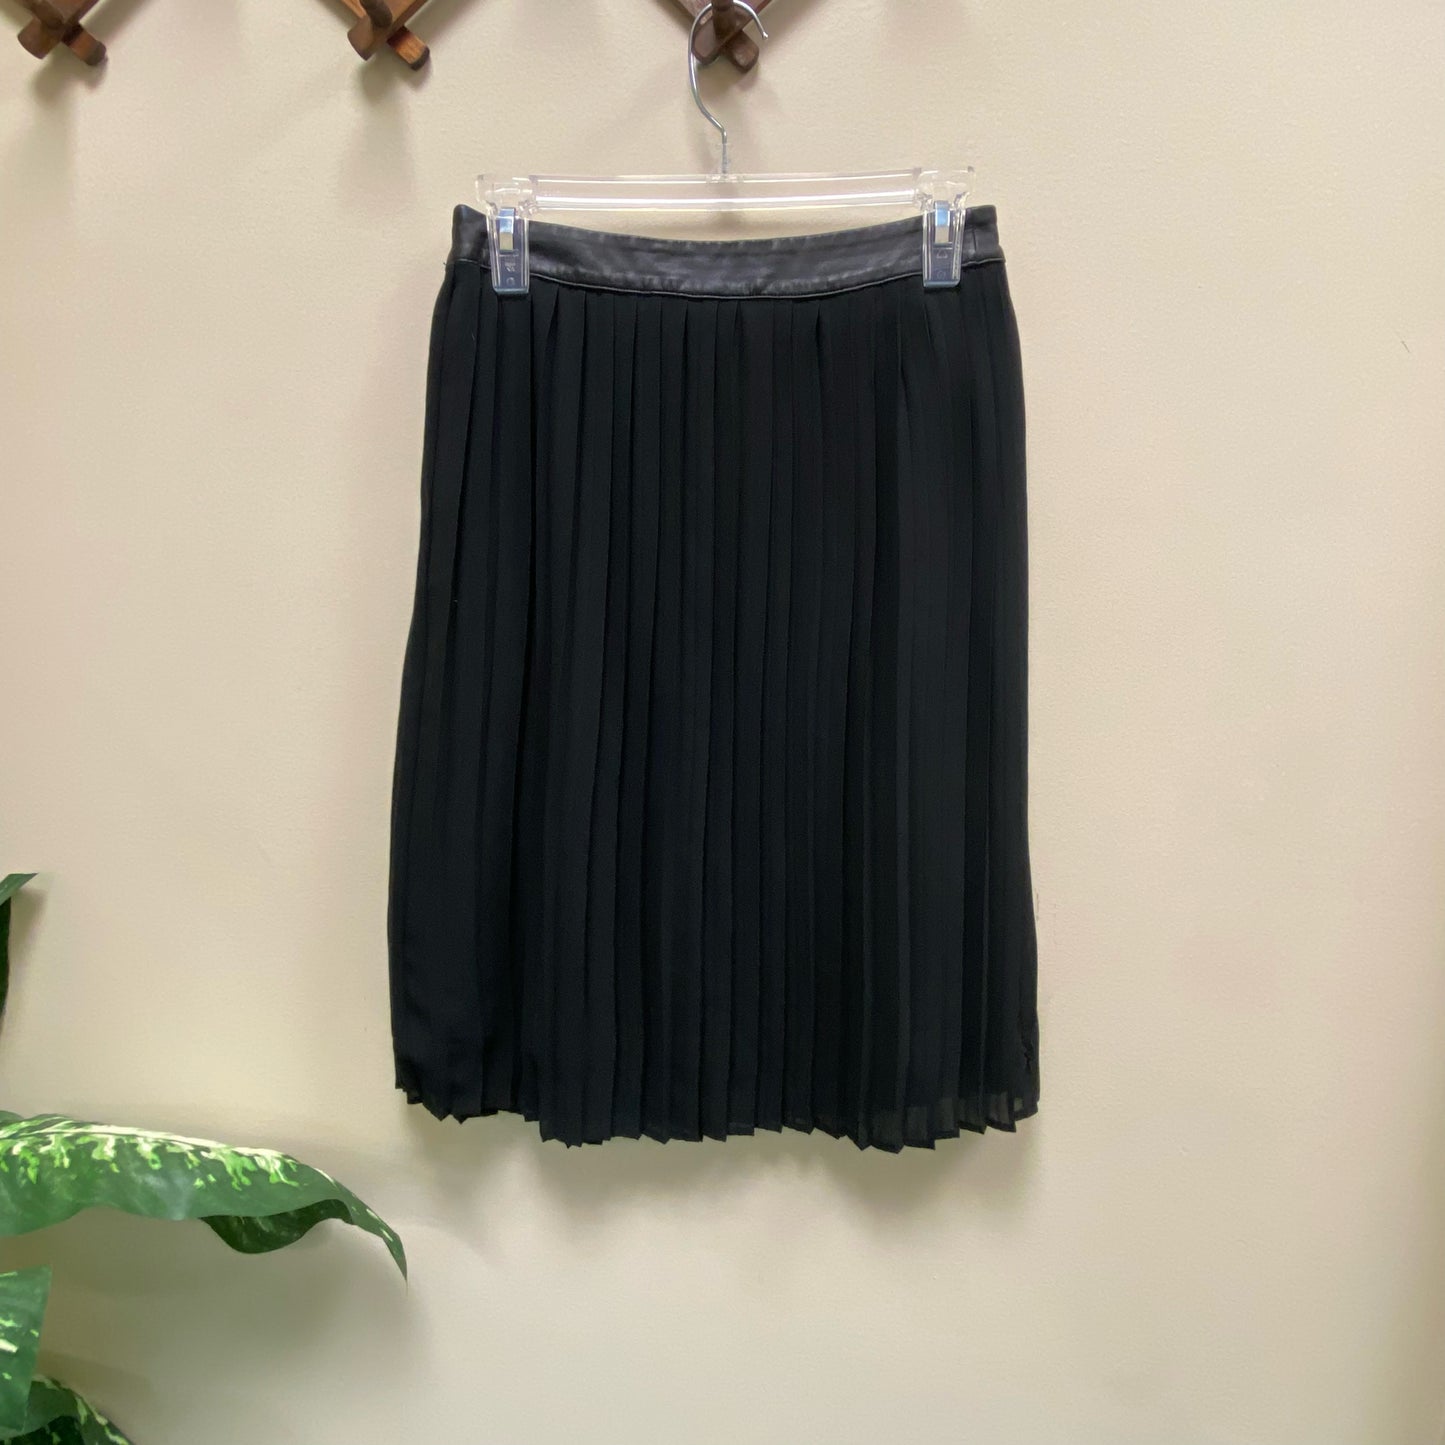 Mossimo Pleated Skirt - Size 4